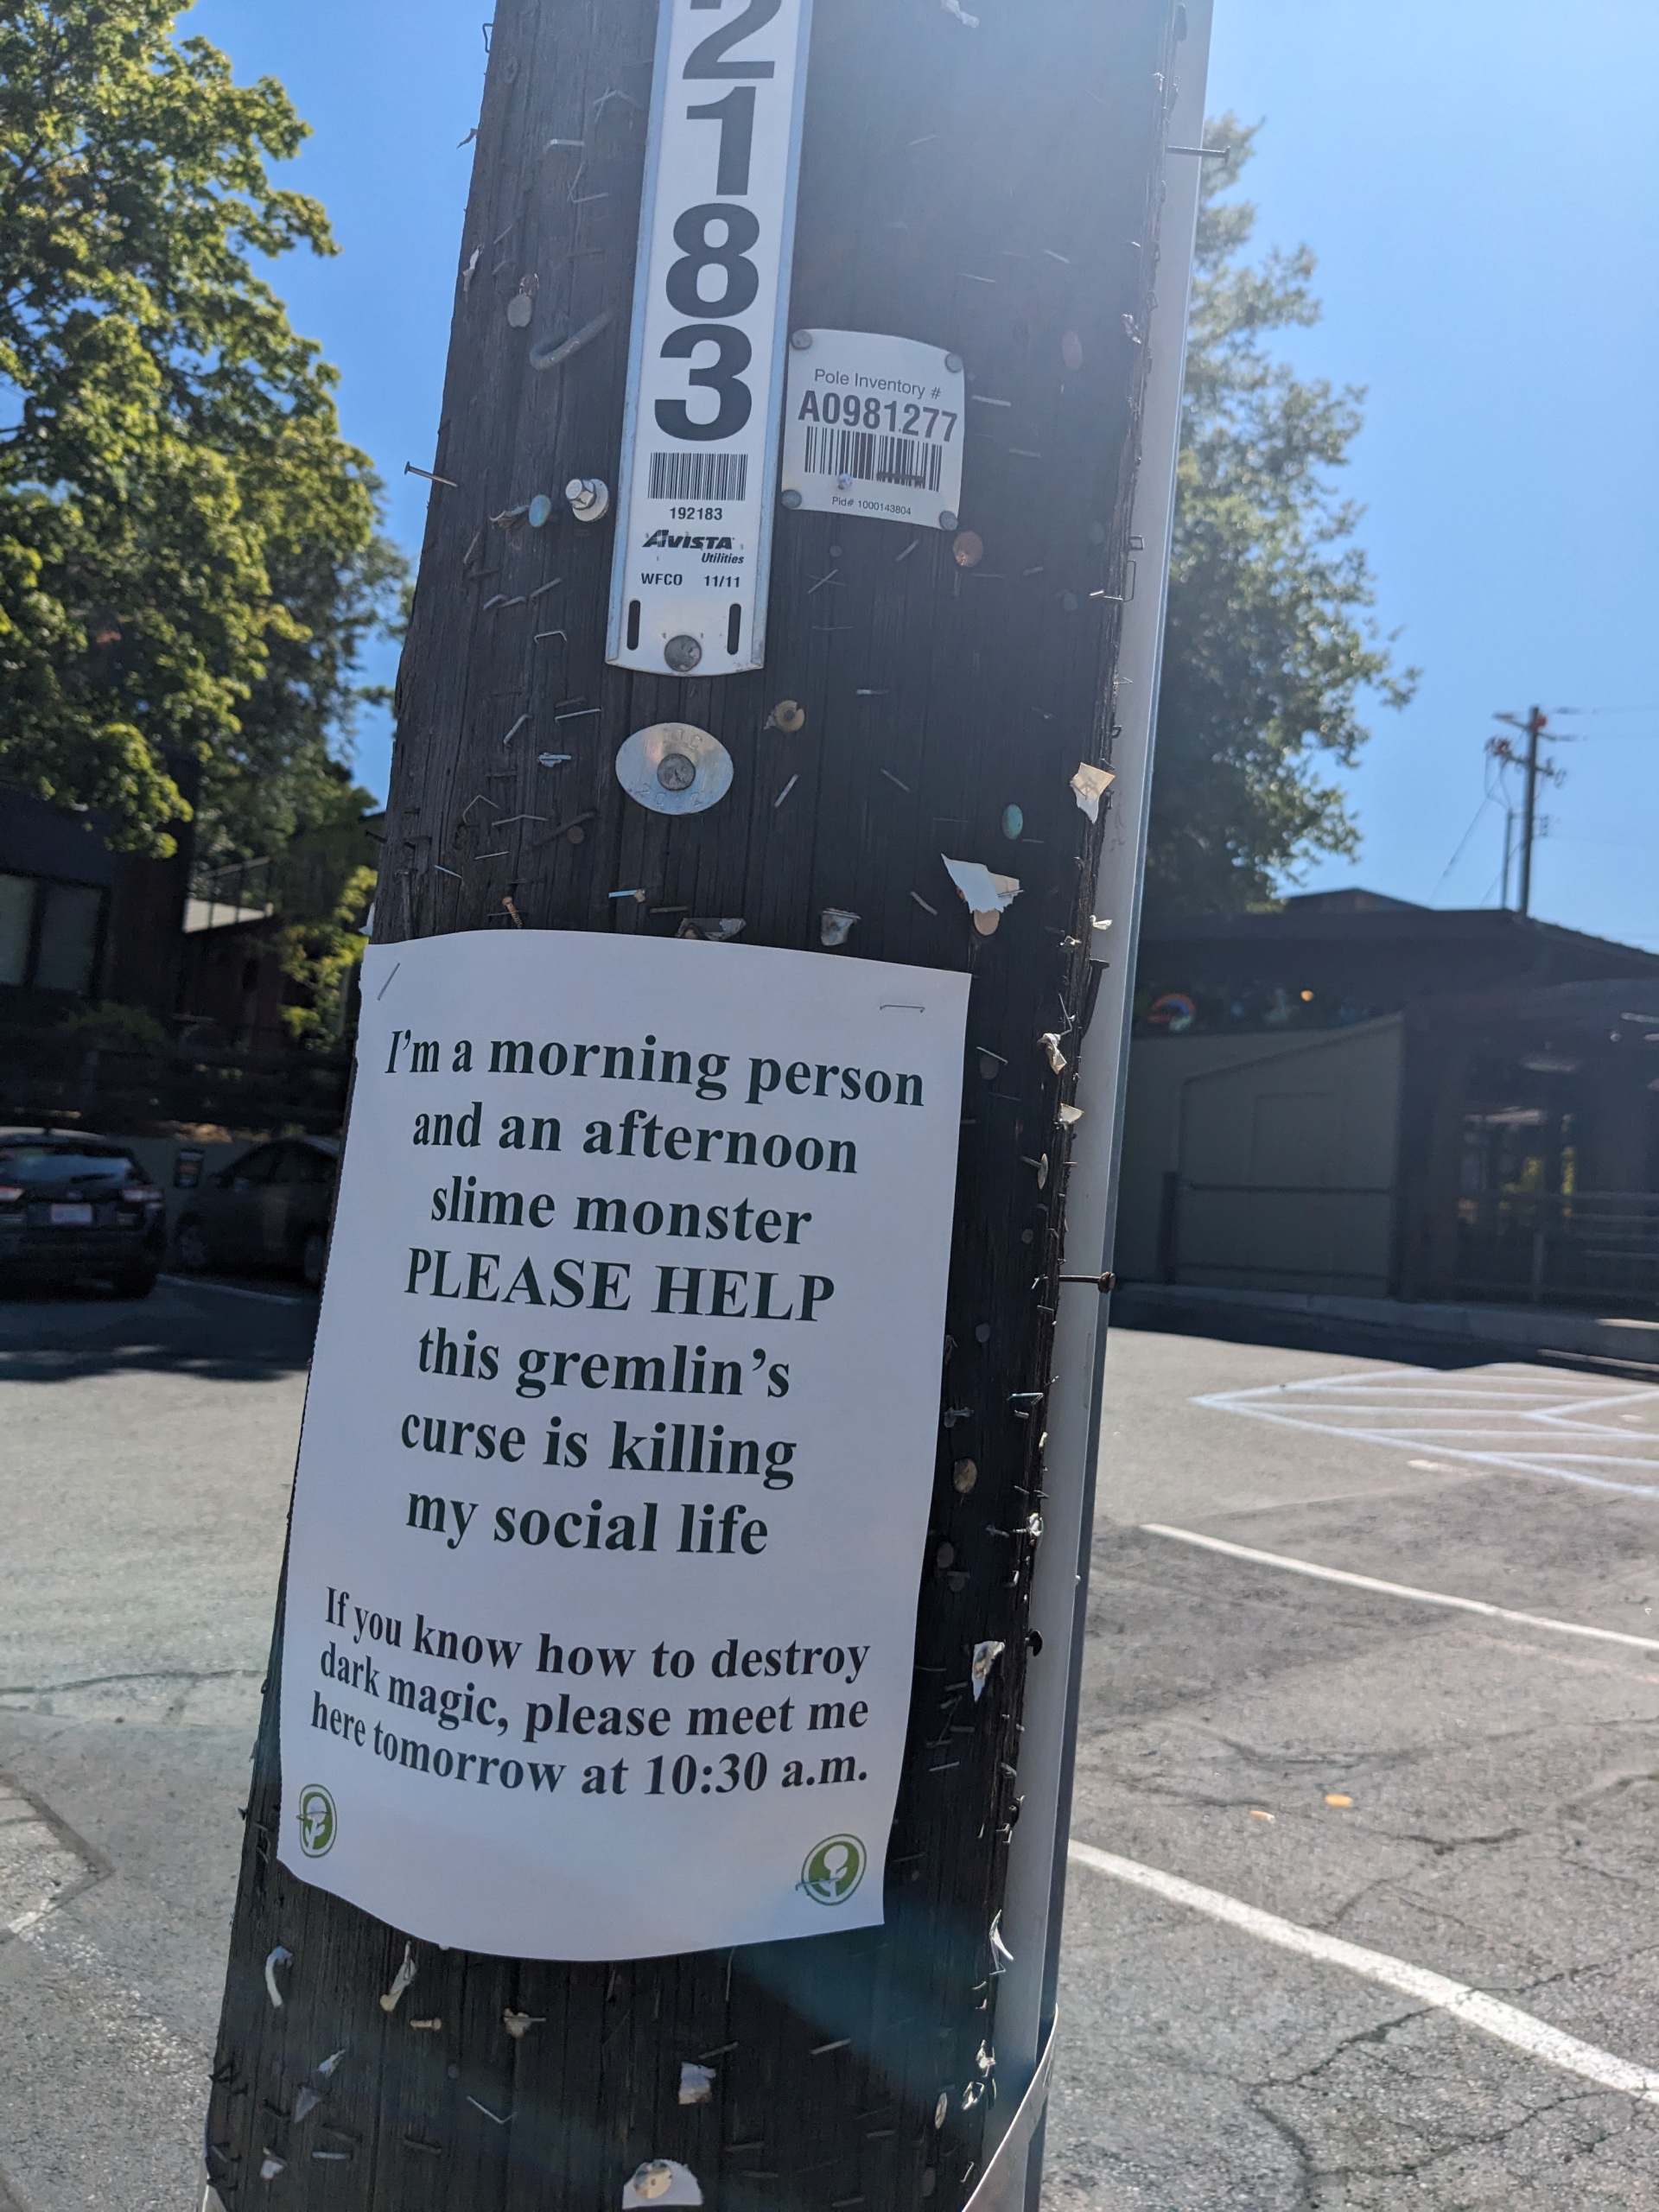 I relate to this very lovely flyer from Spokane, WA